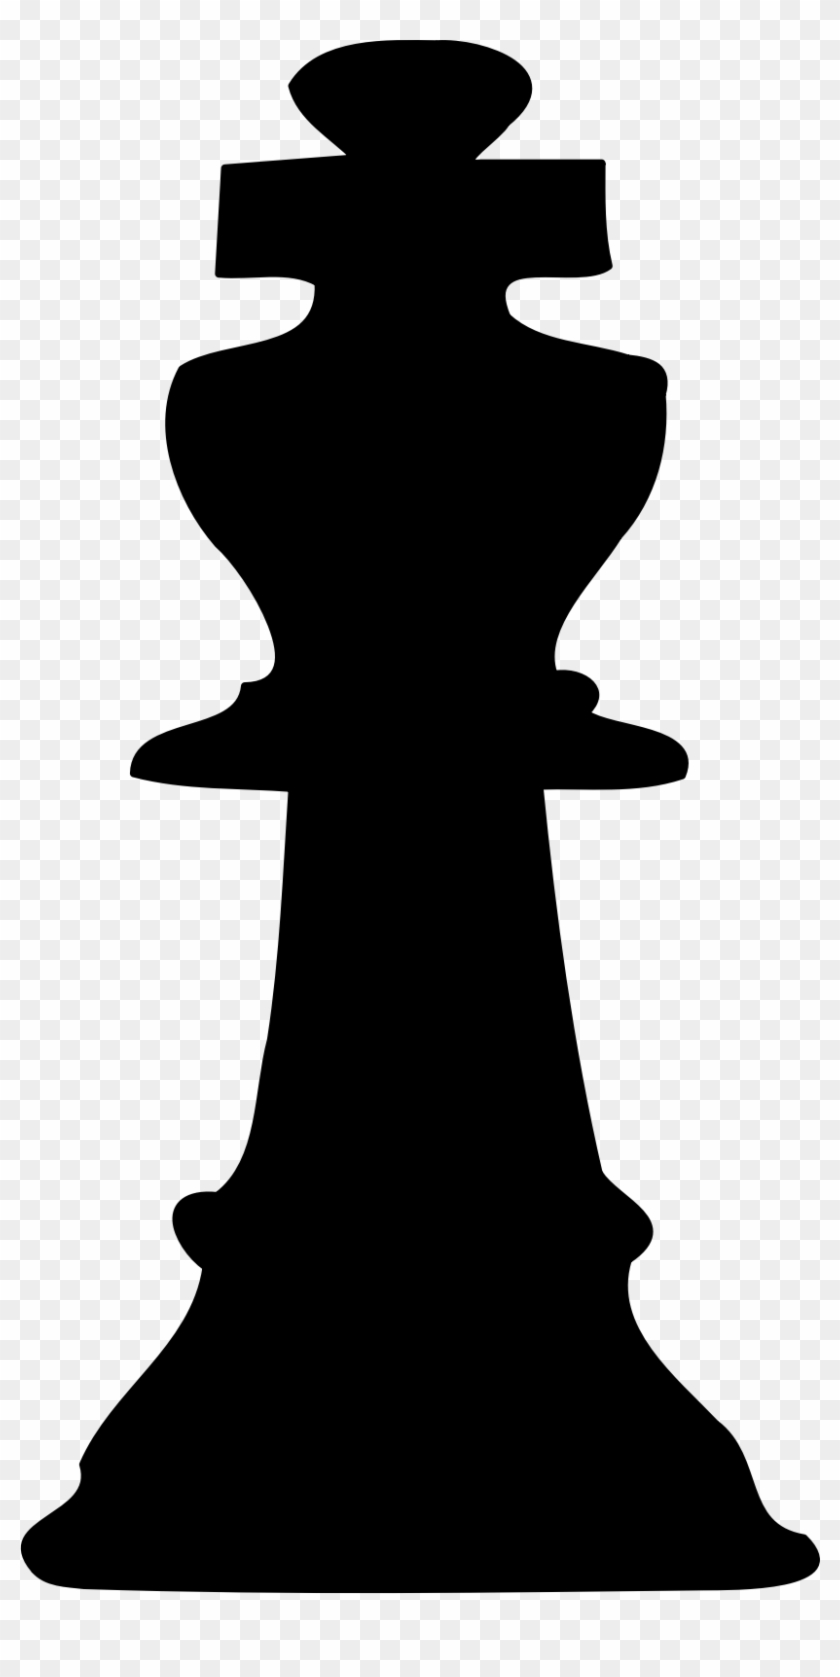 Big Image - King Chess Piece Silhouette, HD Png Download ...